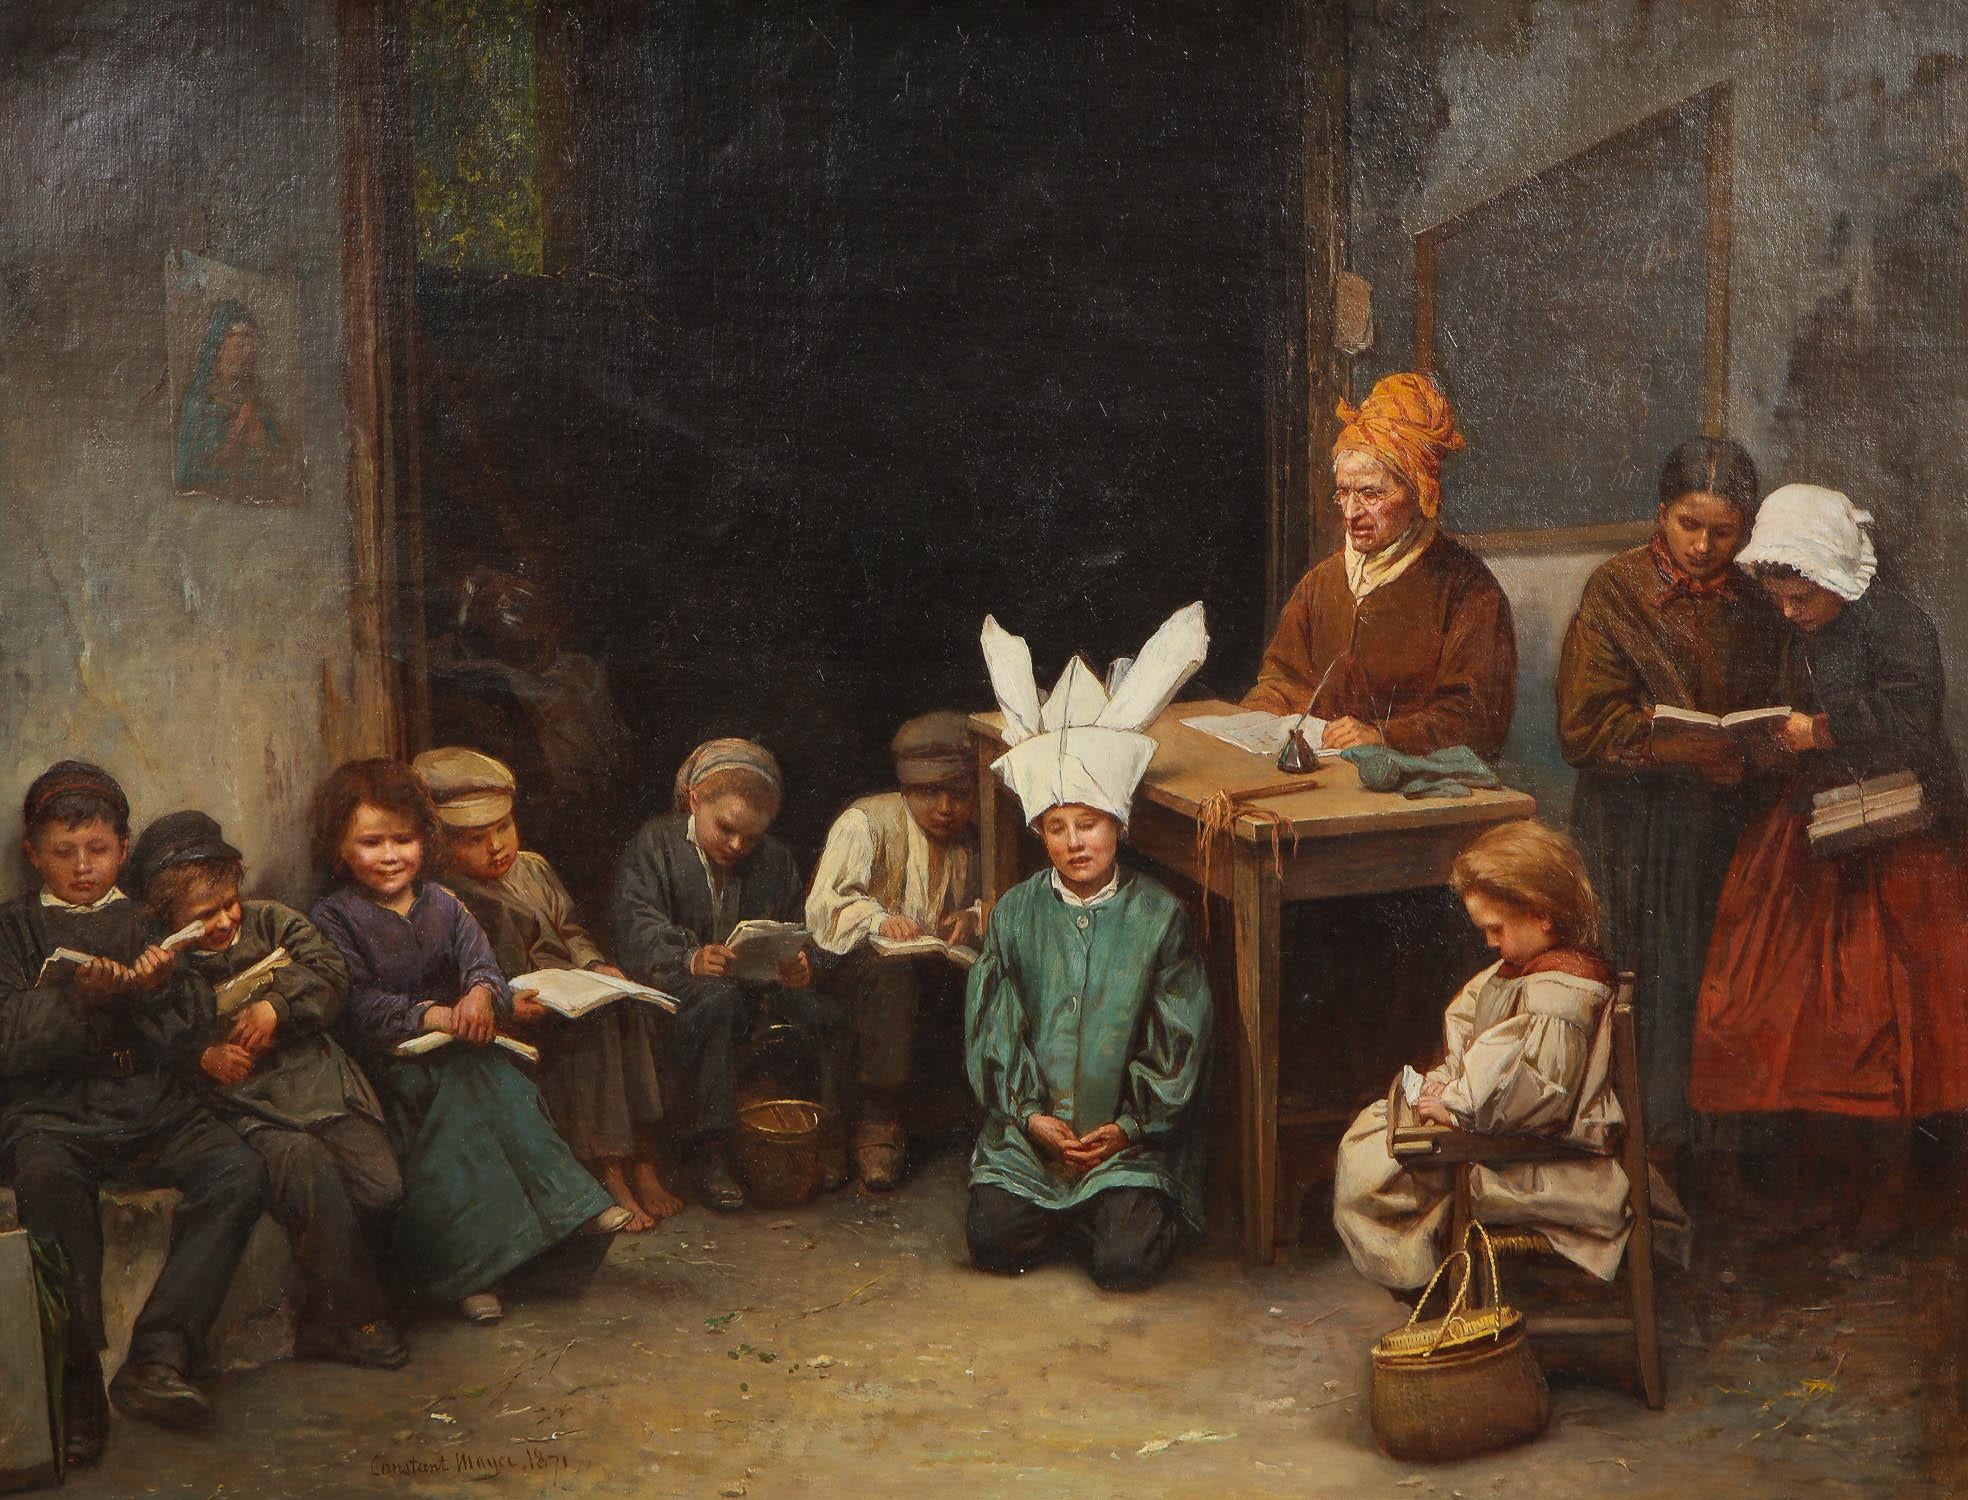 A beautiful American oil on canvas school room scene with a teacher instructing students who are seated on benches and on the ground, with one student who appears to be wearing a dunce cap, signed on the lower left, 